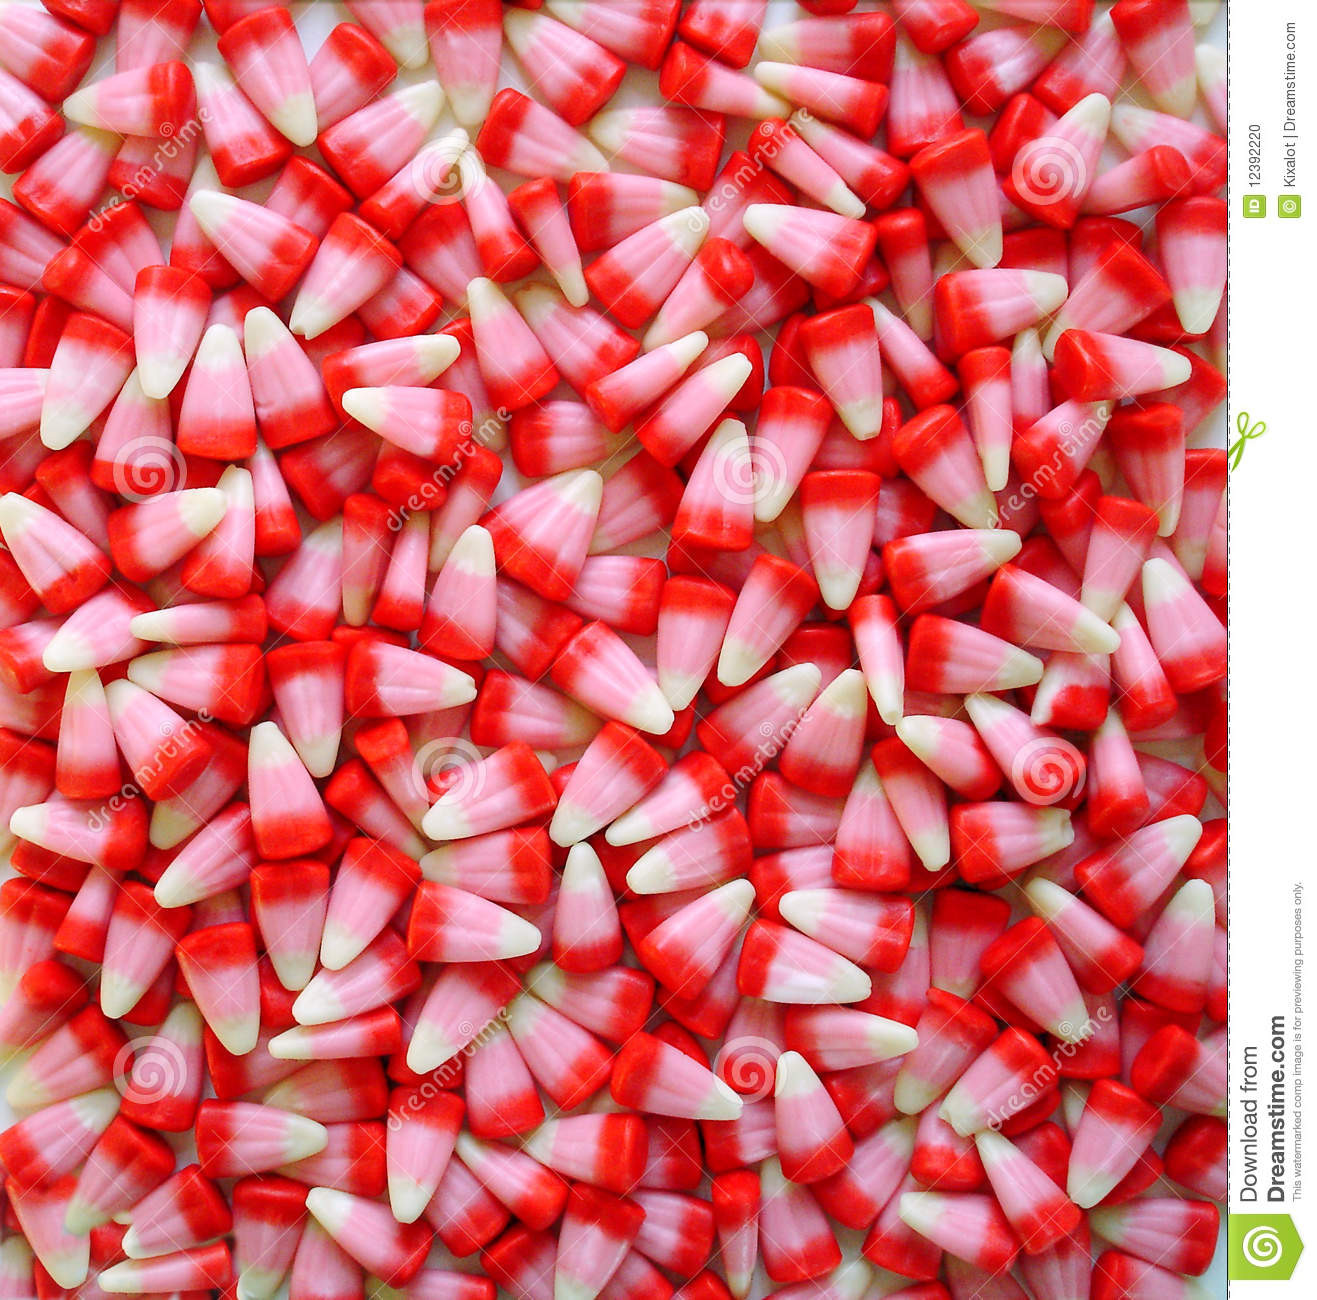 Valentines Day Candy Corn
 Valentine Candy Corn Background Stock Image of